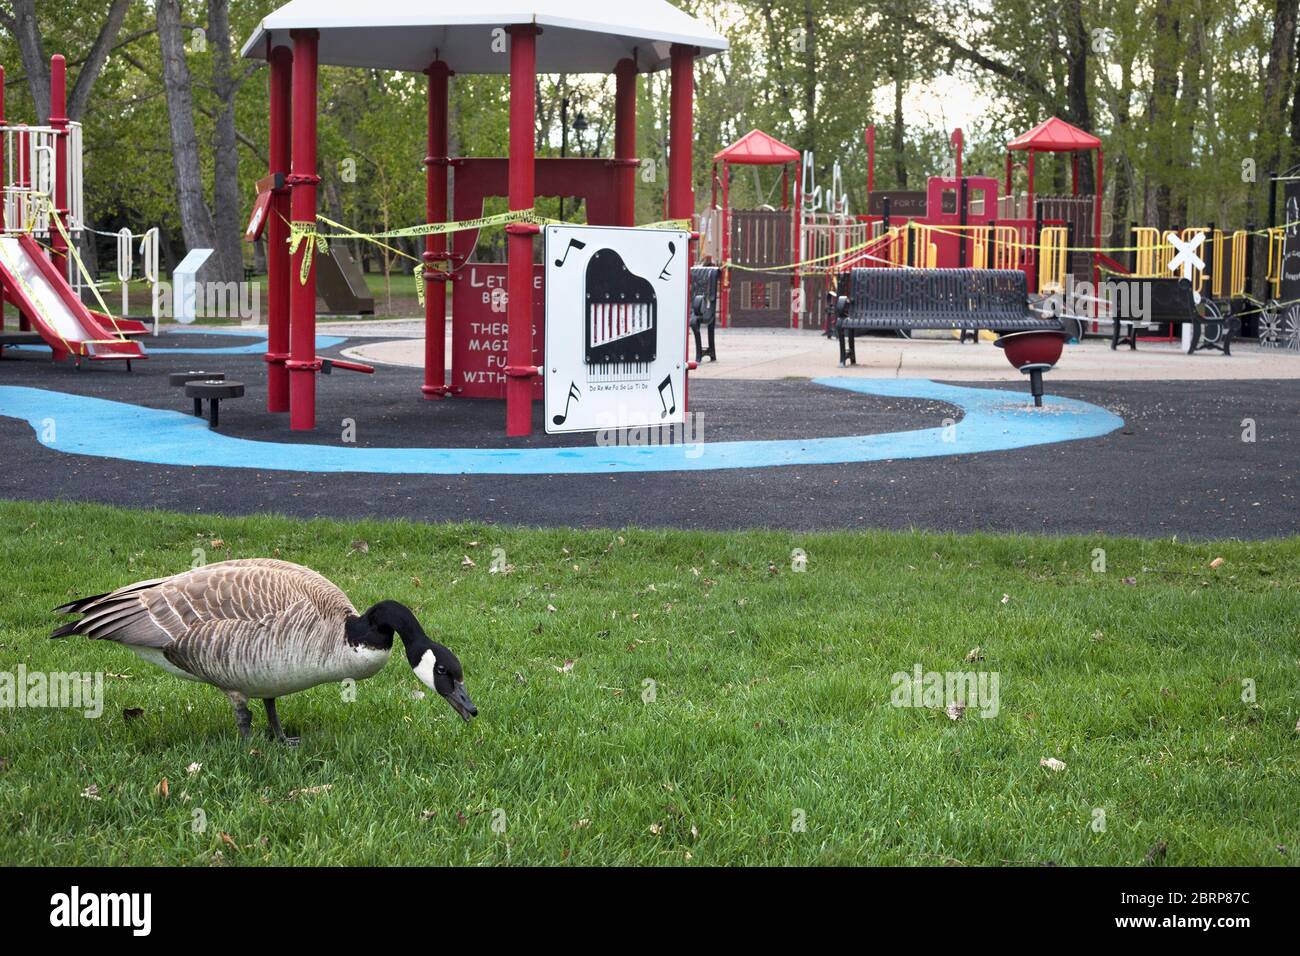 Coronavirus lockdown: Canada Goose grazing on grass is the only occupant of a city park playground closed to prevent the spread of COVID 19 Stock Photo